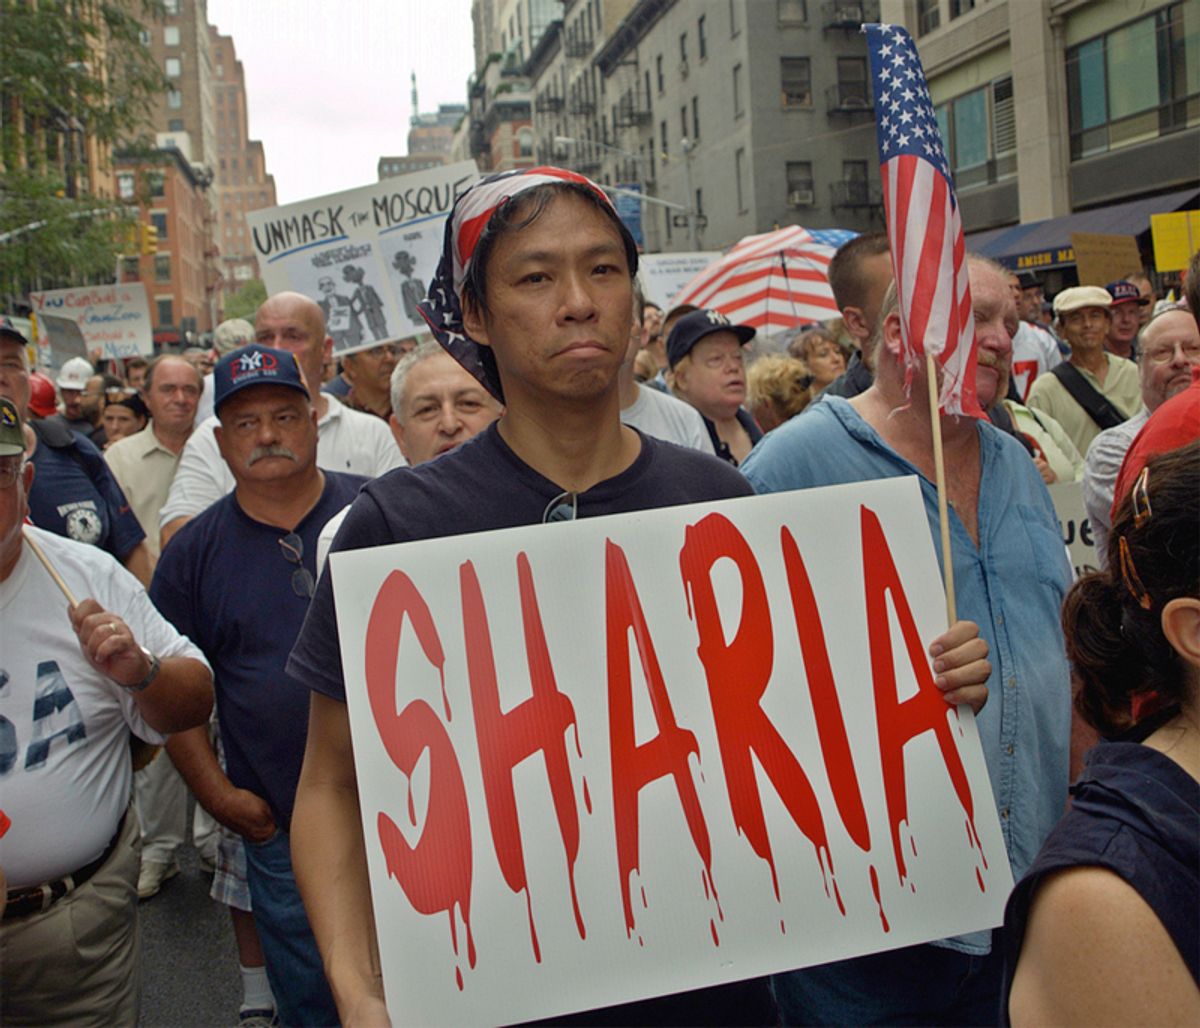 Ground Zero Mosque protesters in August 2010